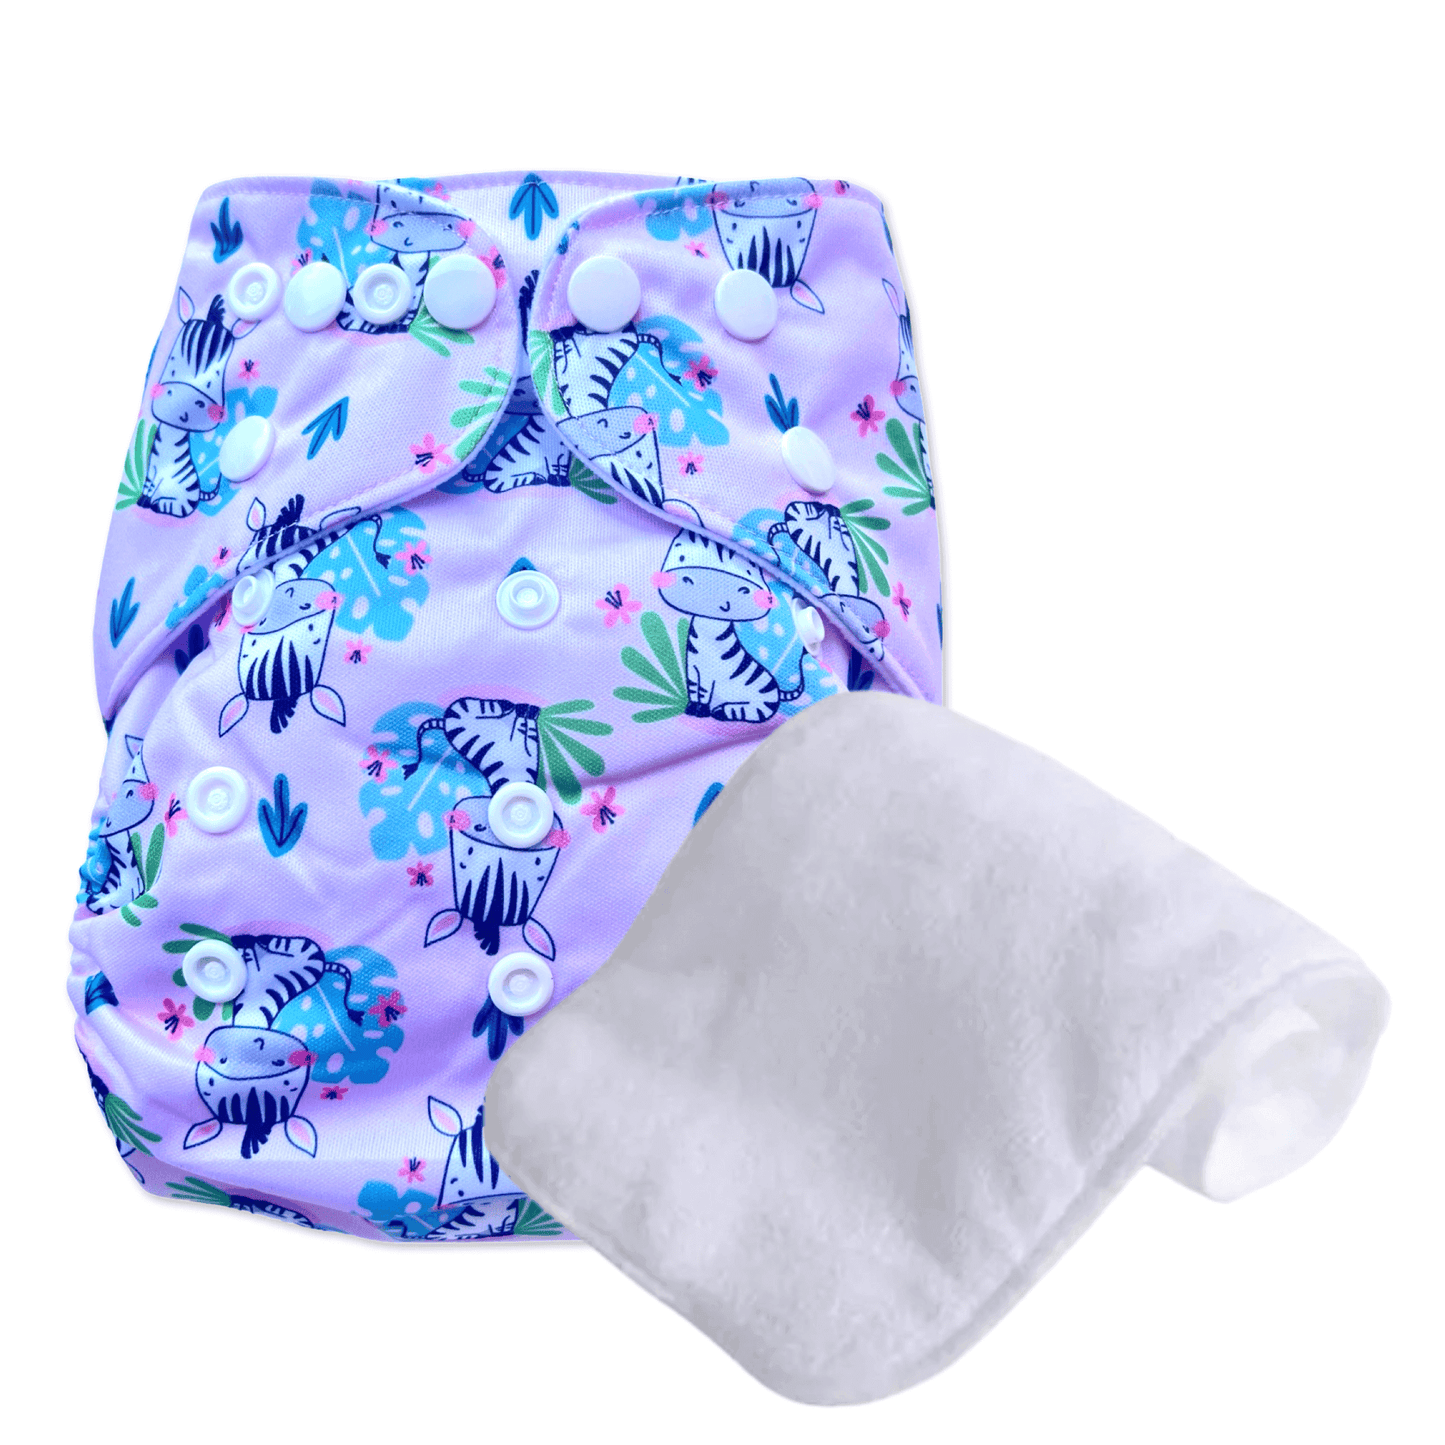 Reusable Cloth Nappy with Insert